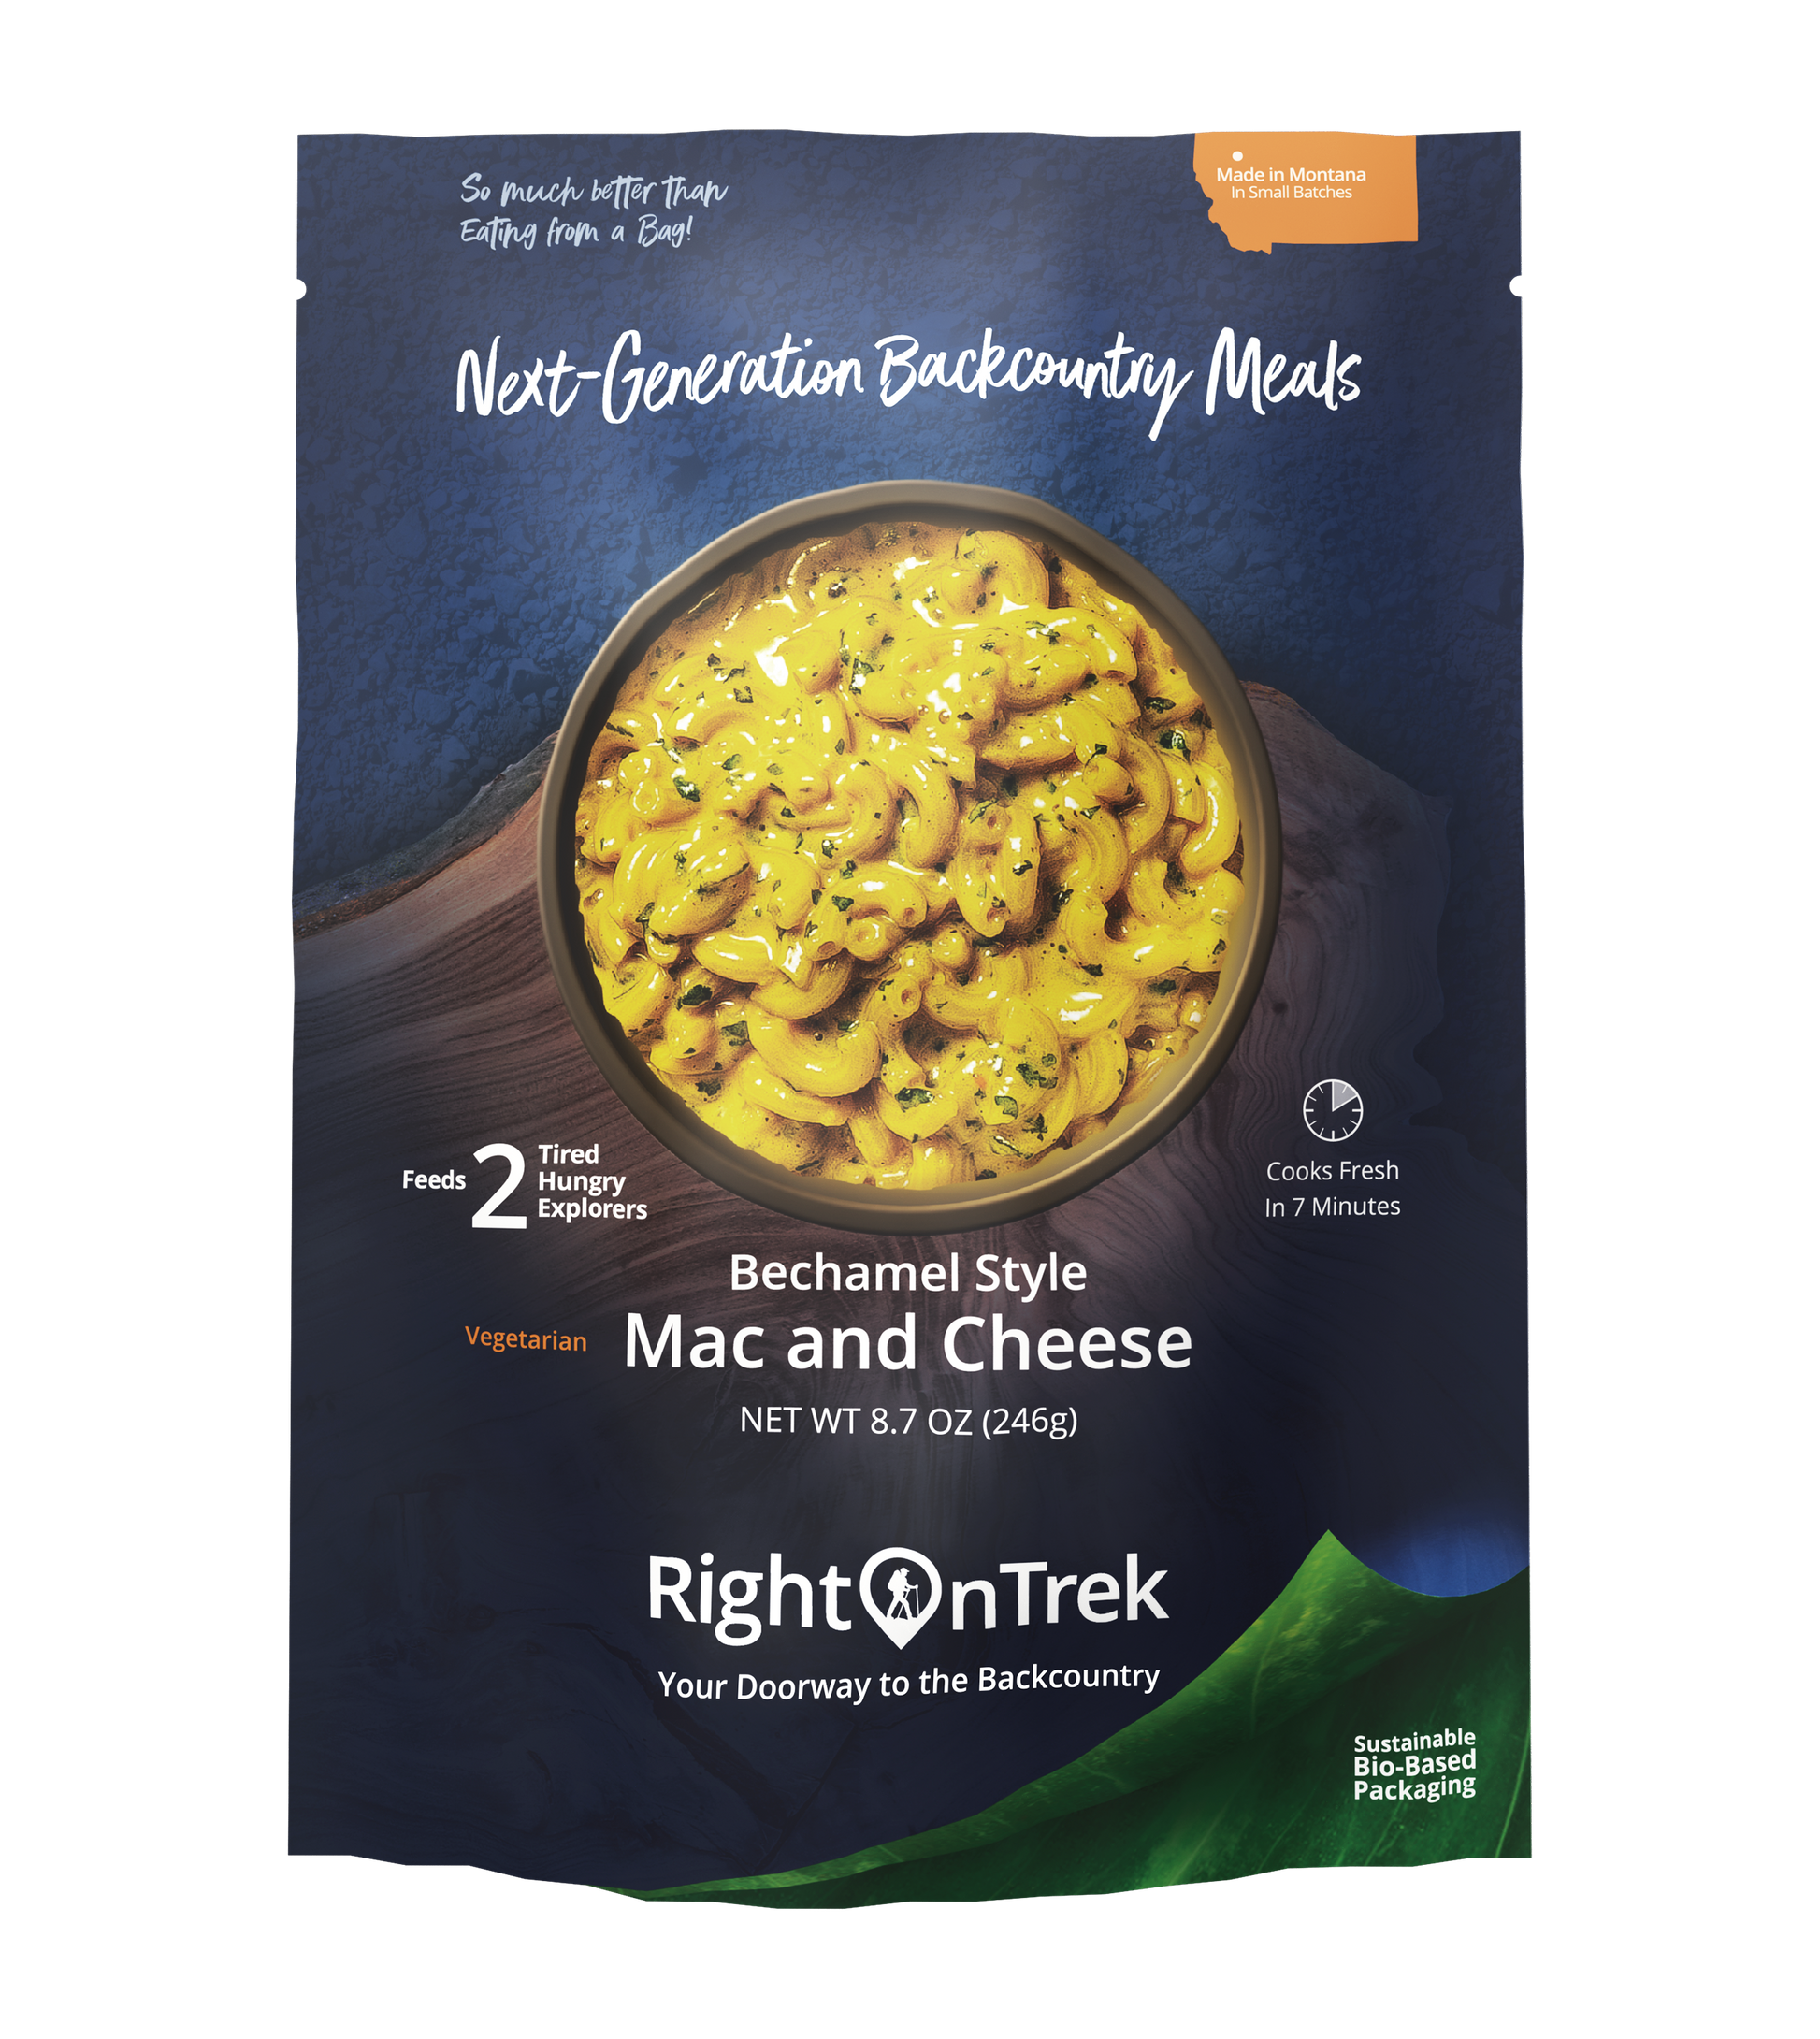 RightOnTrek bechamel style mac and cheese feeds 2 people